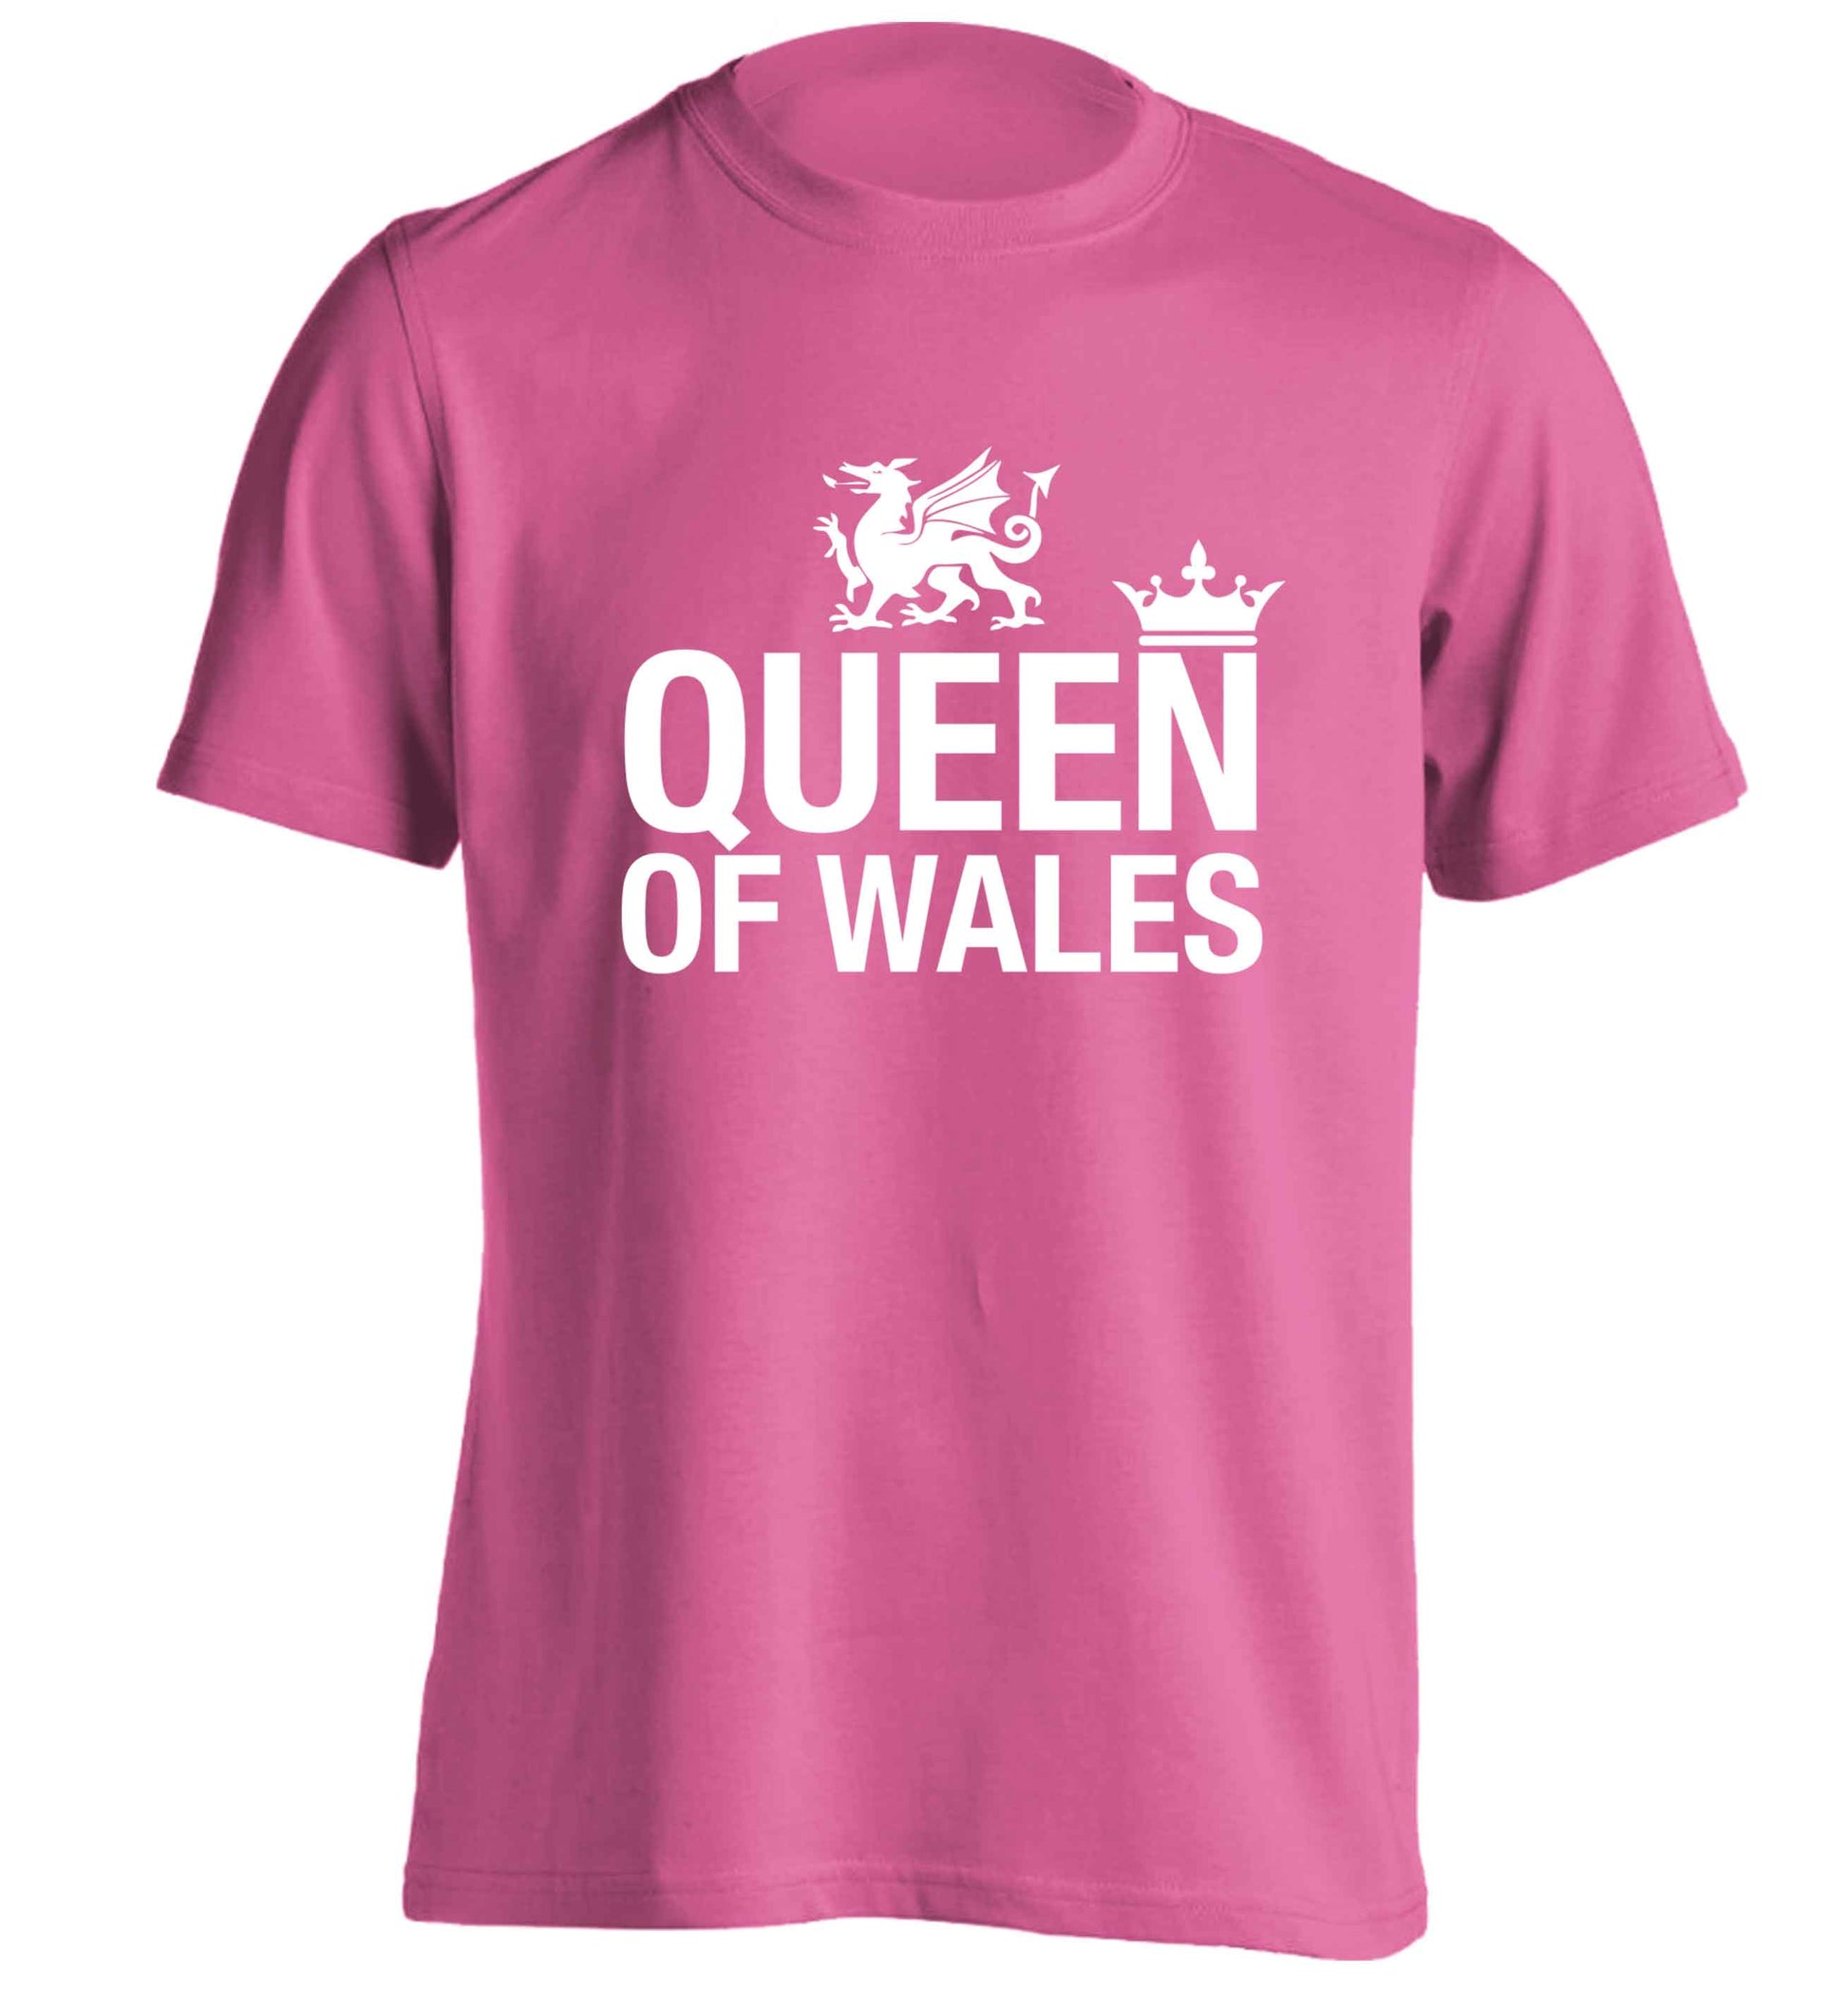 Queen of Wales adults unisex pink Tshirt 2XL